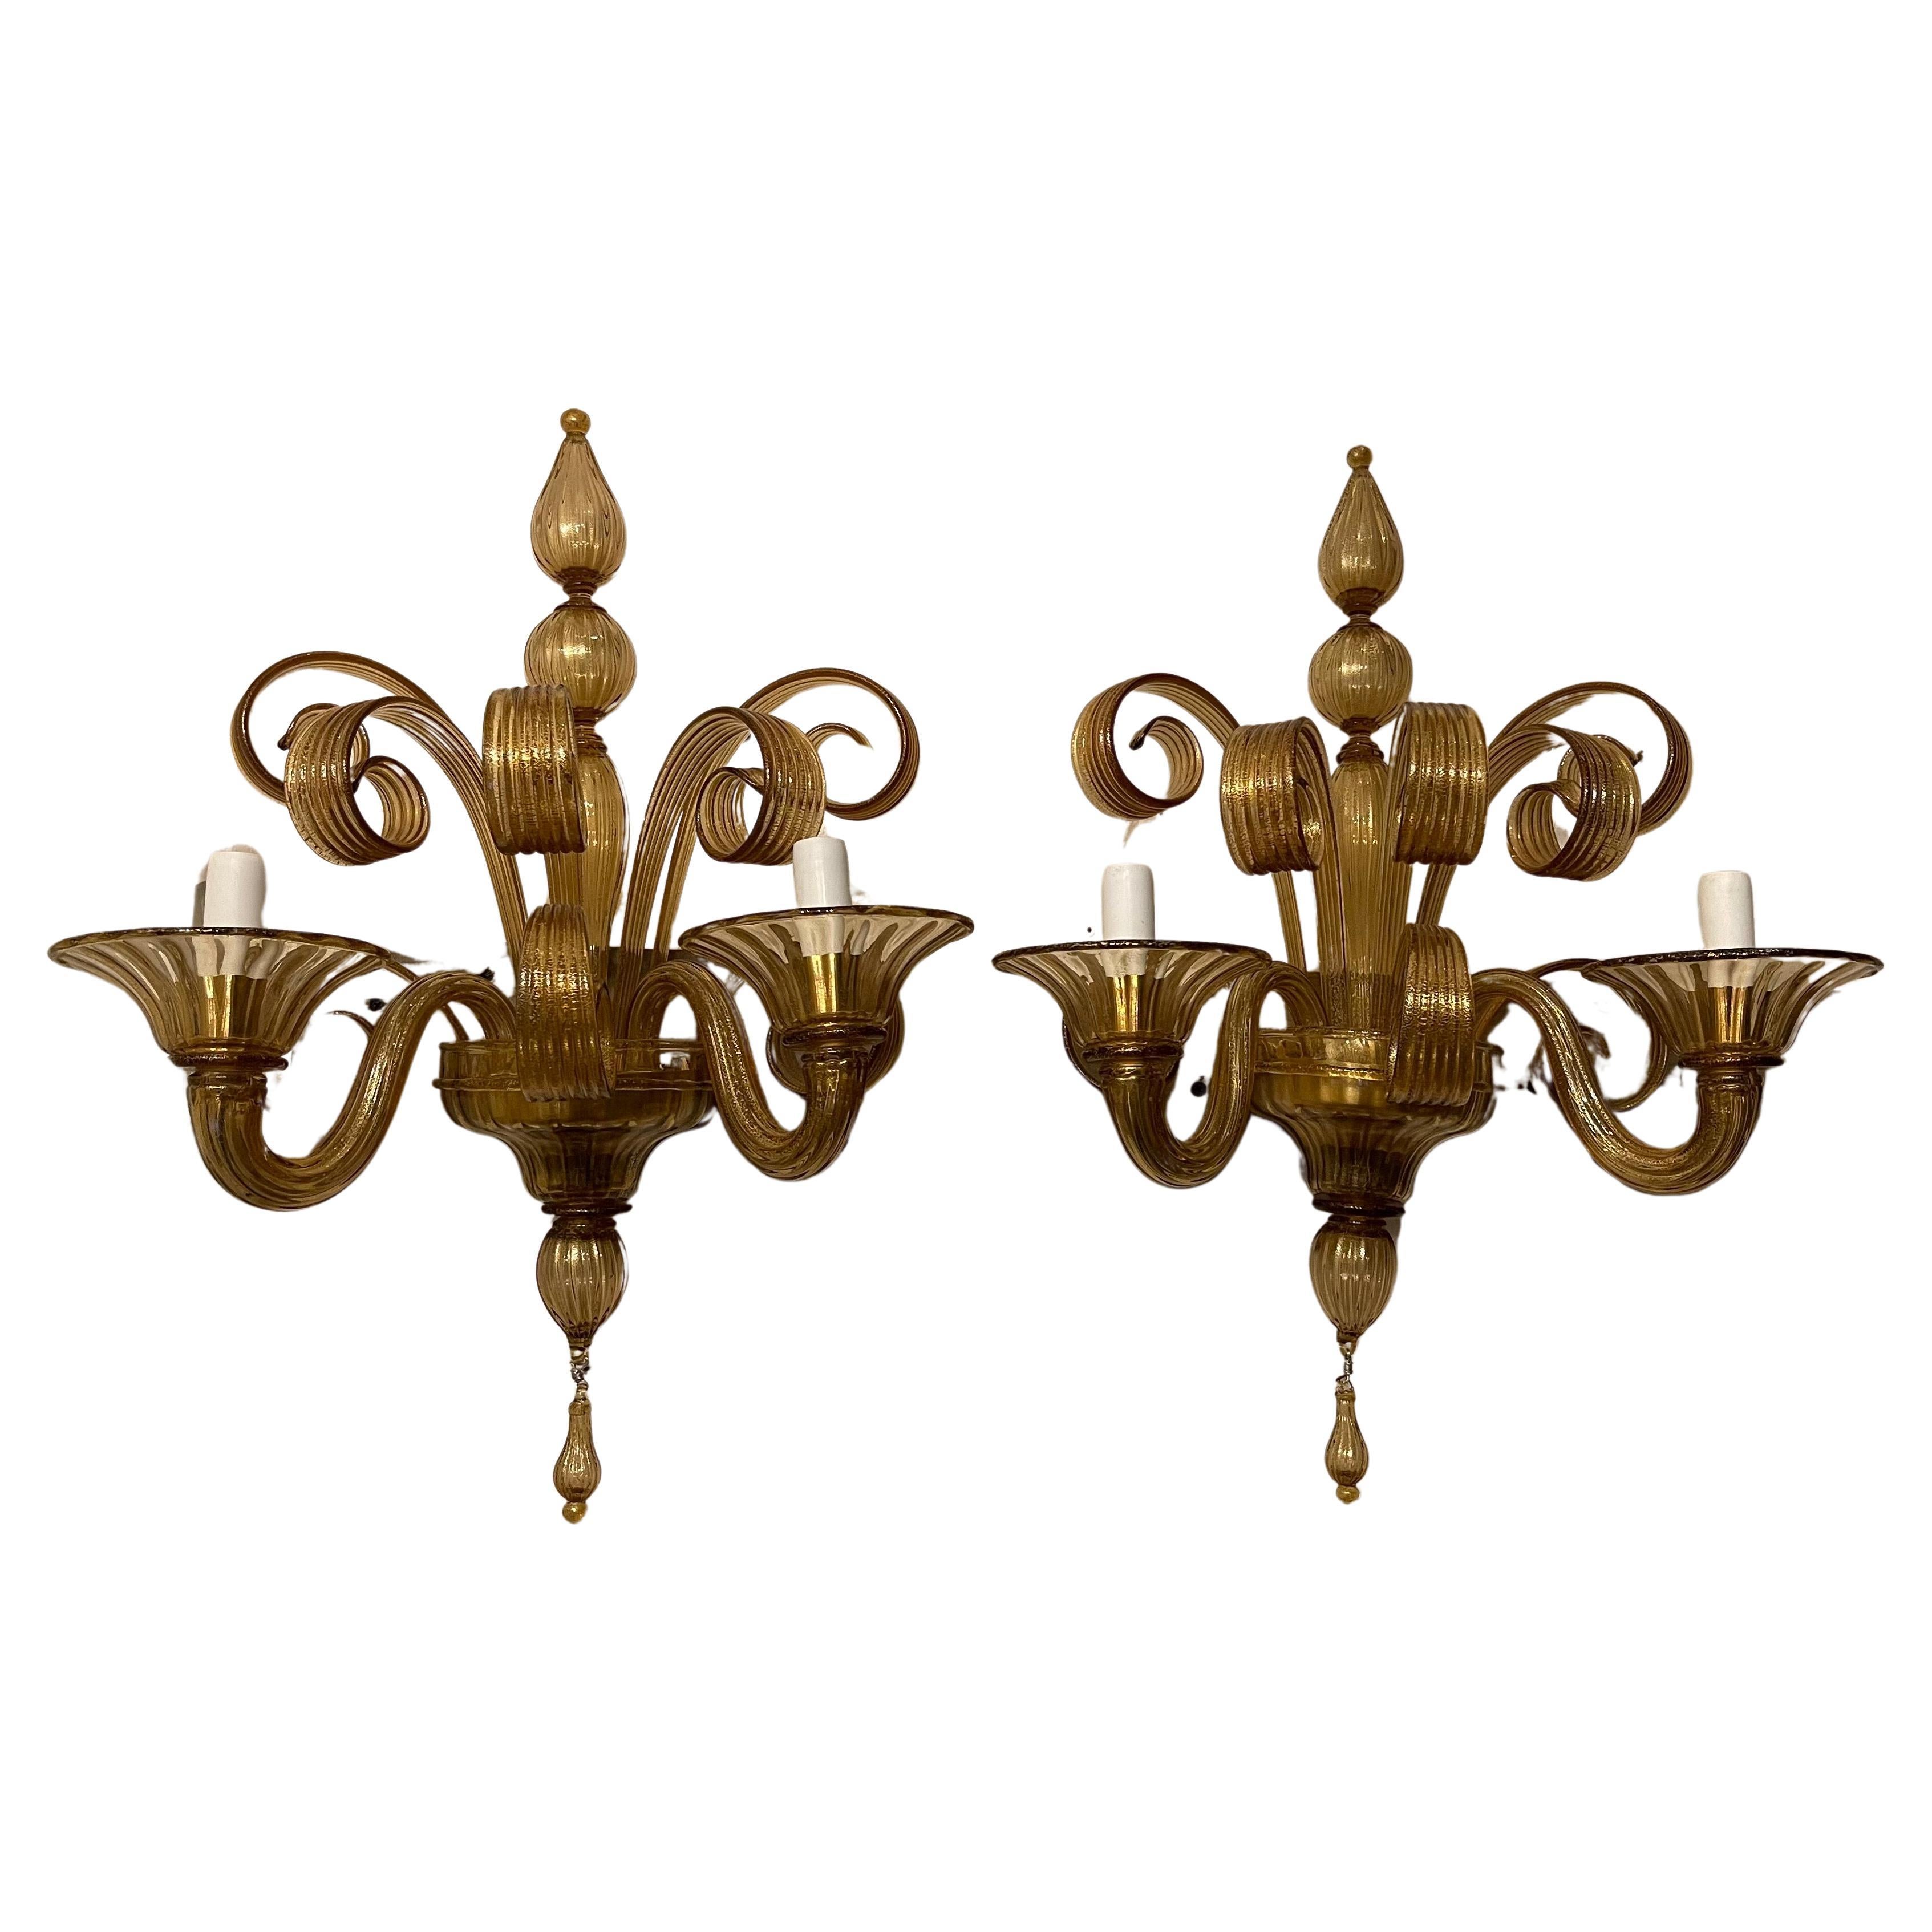 Wonderful Pair Lorin Marsh Two Candelabra Light Murano Gold Flake Glass Sconces For Sale